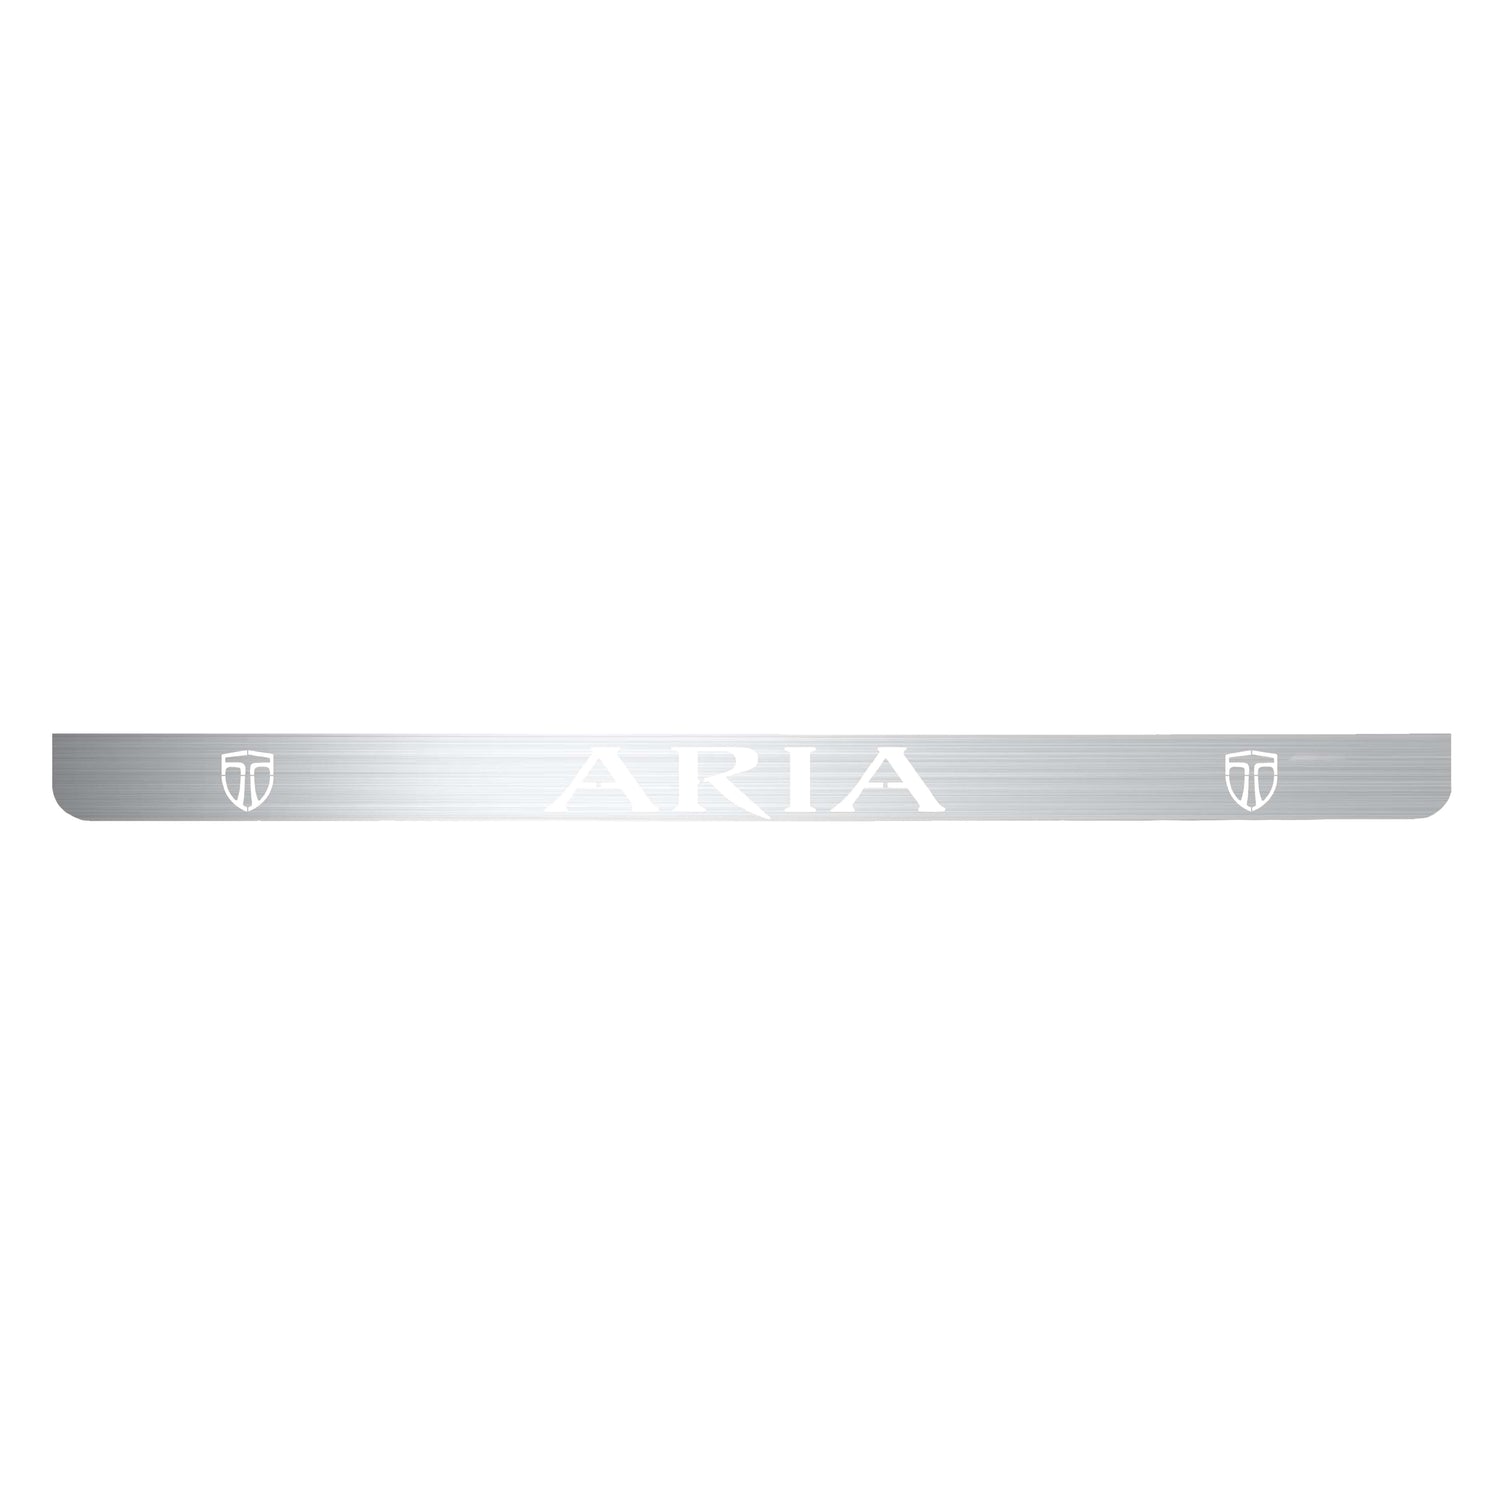 Future-Sales-Aria-Face-Plate-stainless-steel-brushed-finish-Height-6-Width-94-backer-plate-SSARIA-L-02B